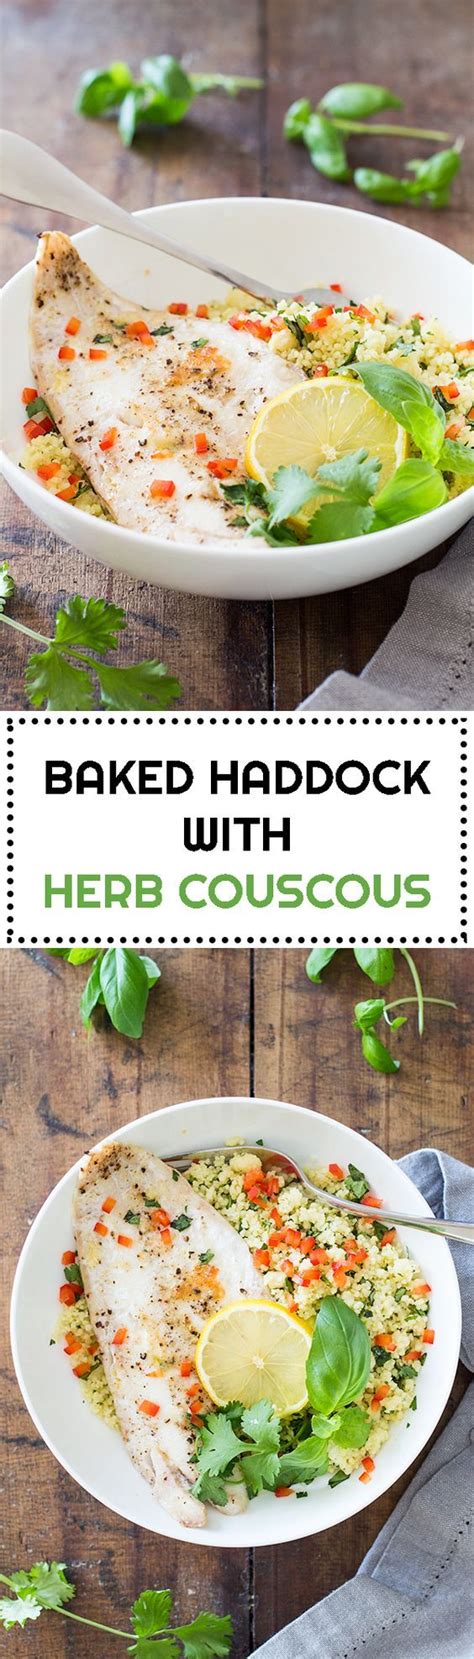 Bake for 20 to 25 minutes, or until a safe centralized temperature is reached. Baked Haddock with Herb Couscous - Green Healthy Cooking ...